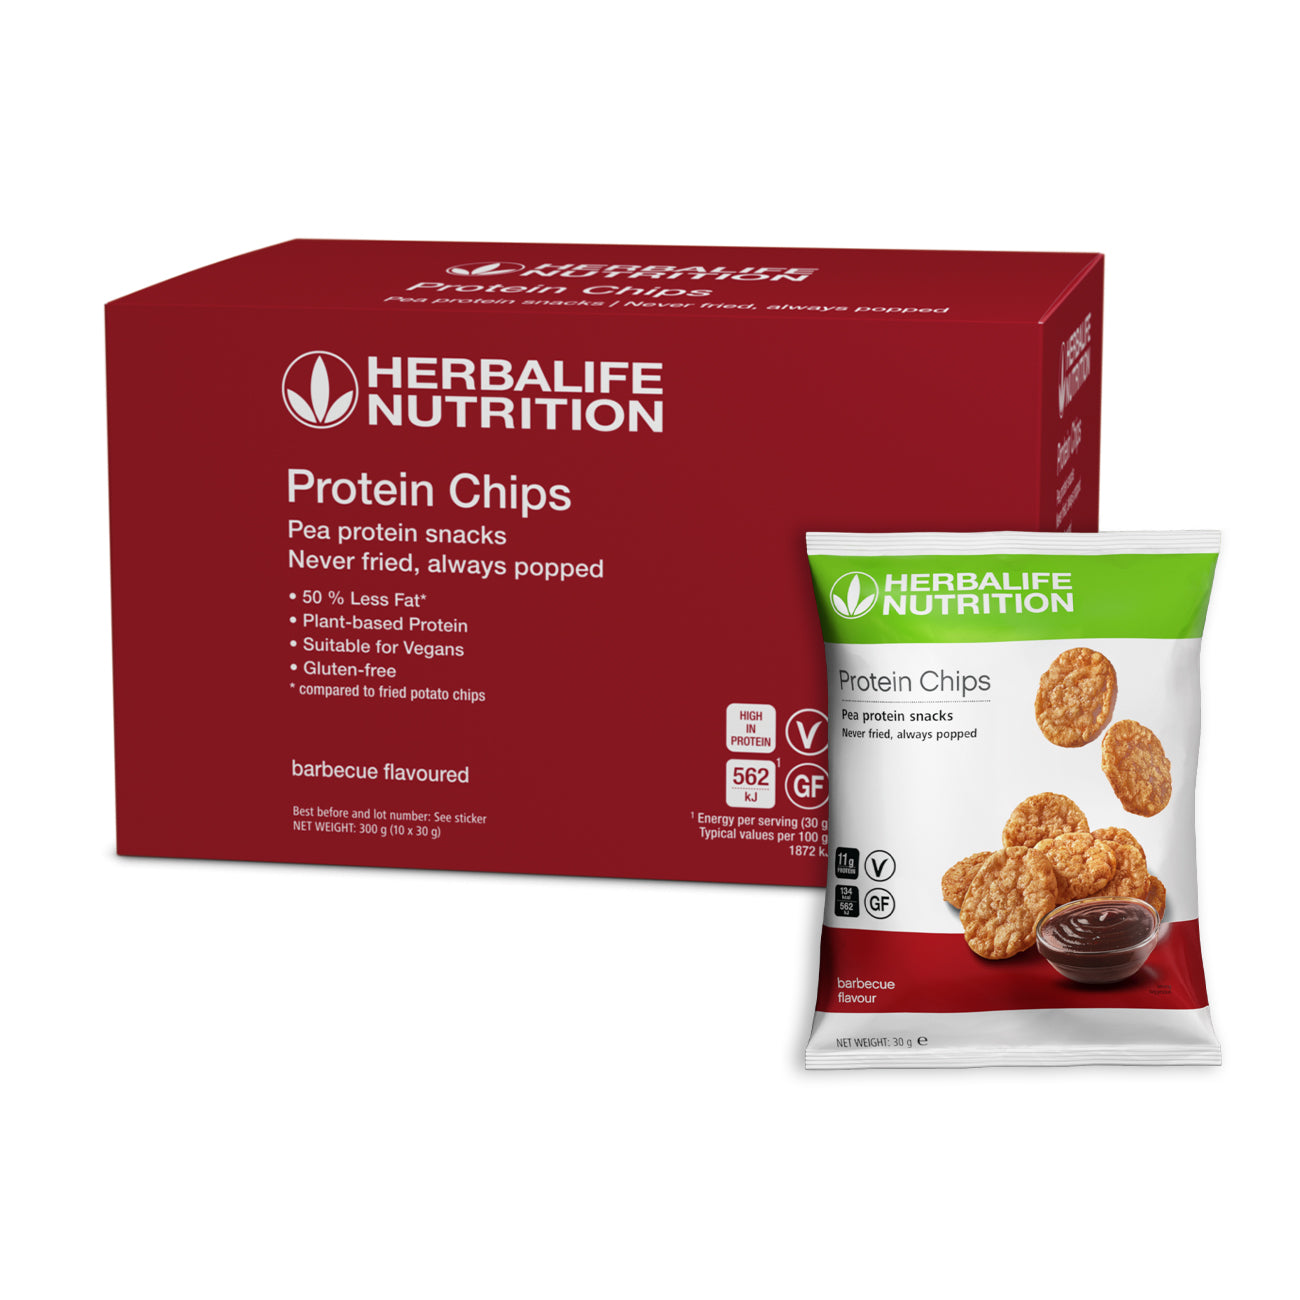 Herbalife Protein Chips 10 packs per carton x 30g each Barbecue